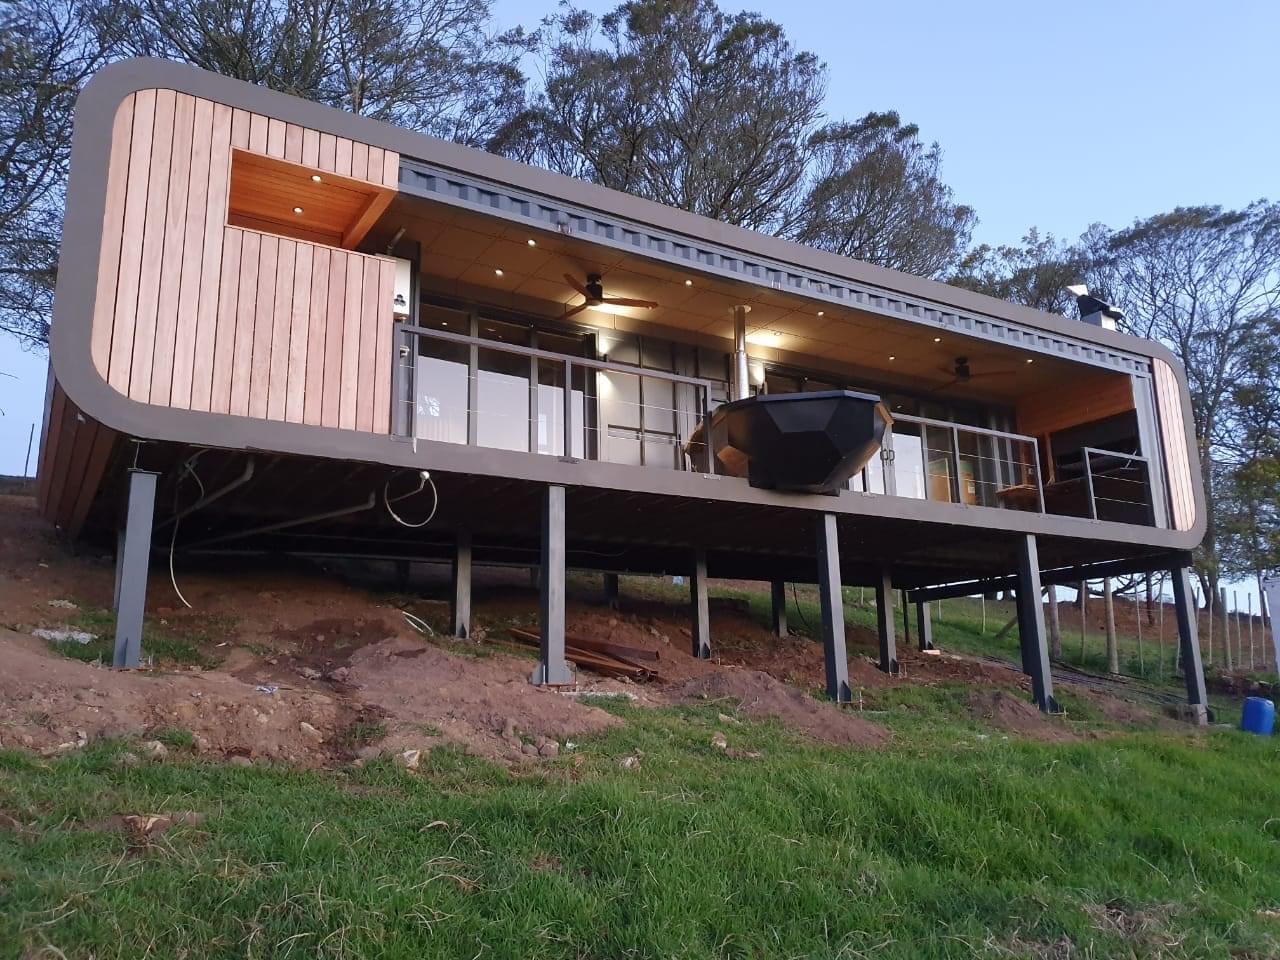 Gary Power’s Stunning Africa Container Home